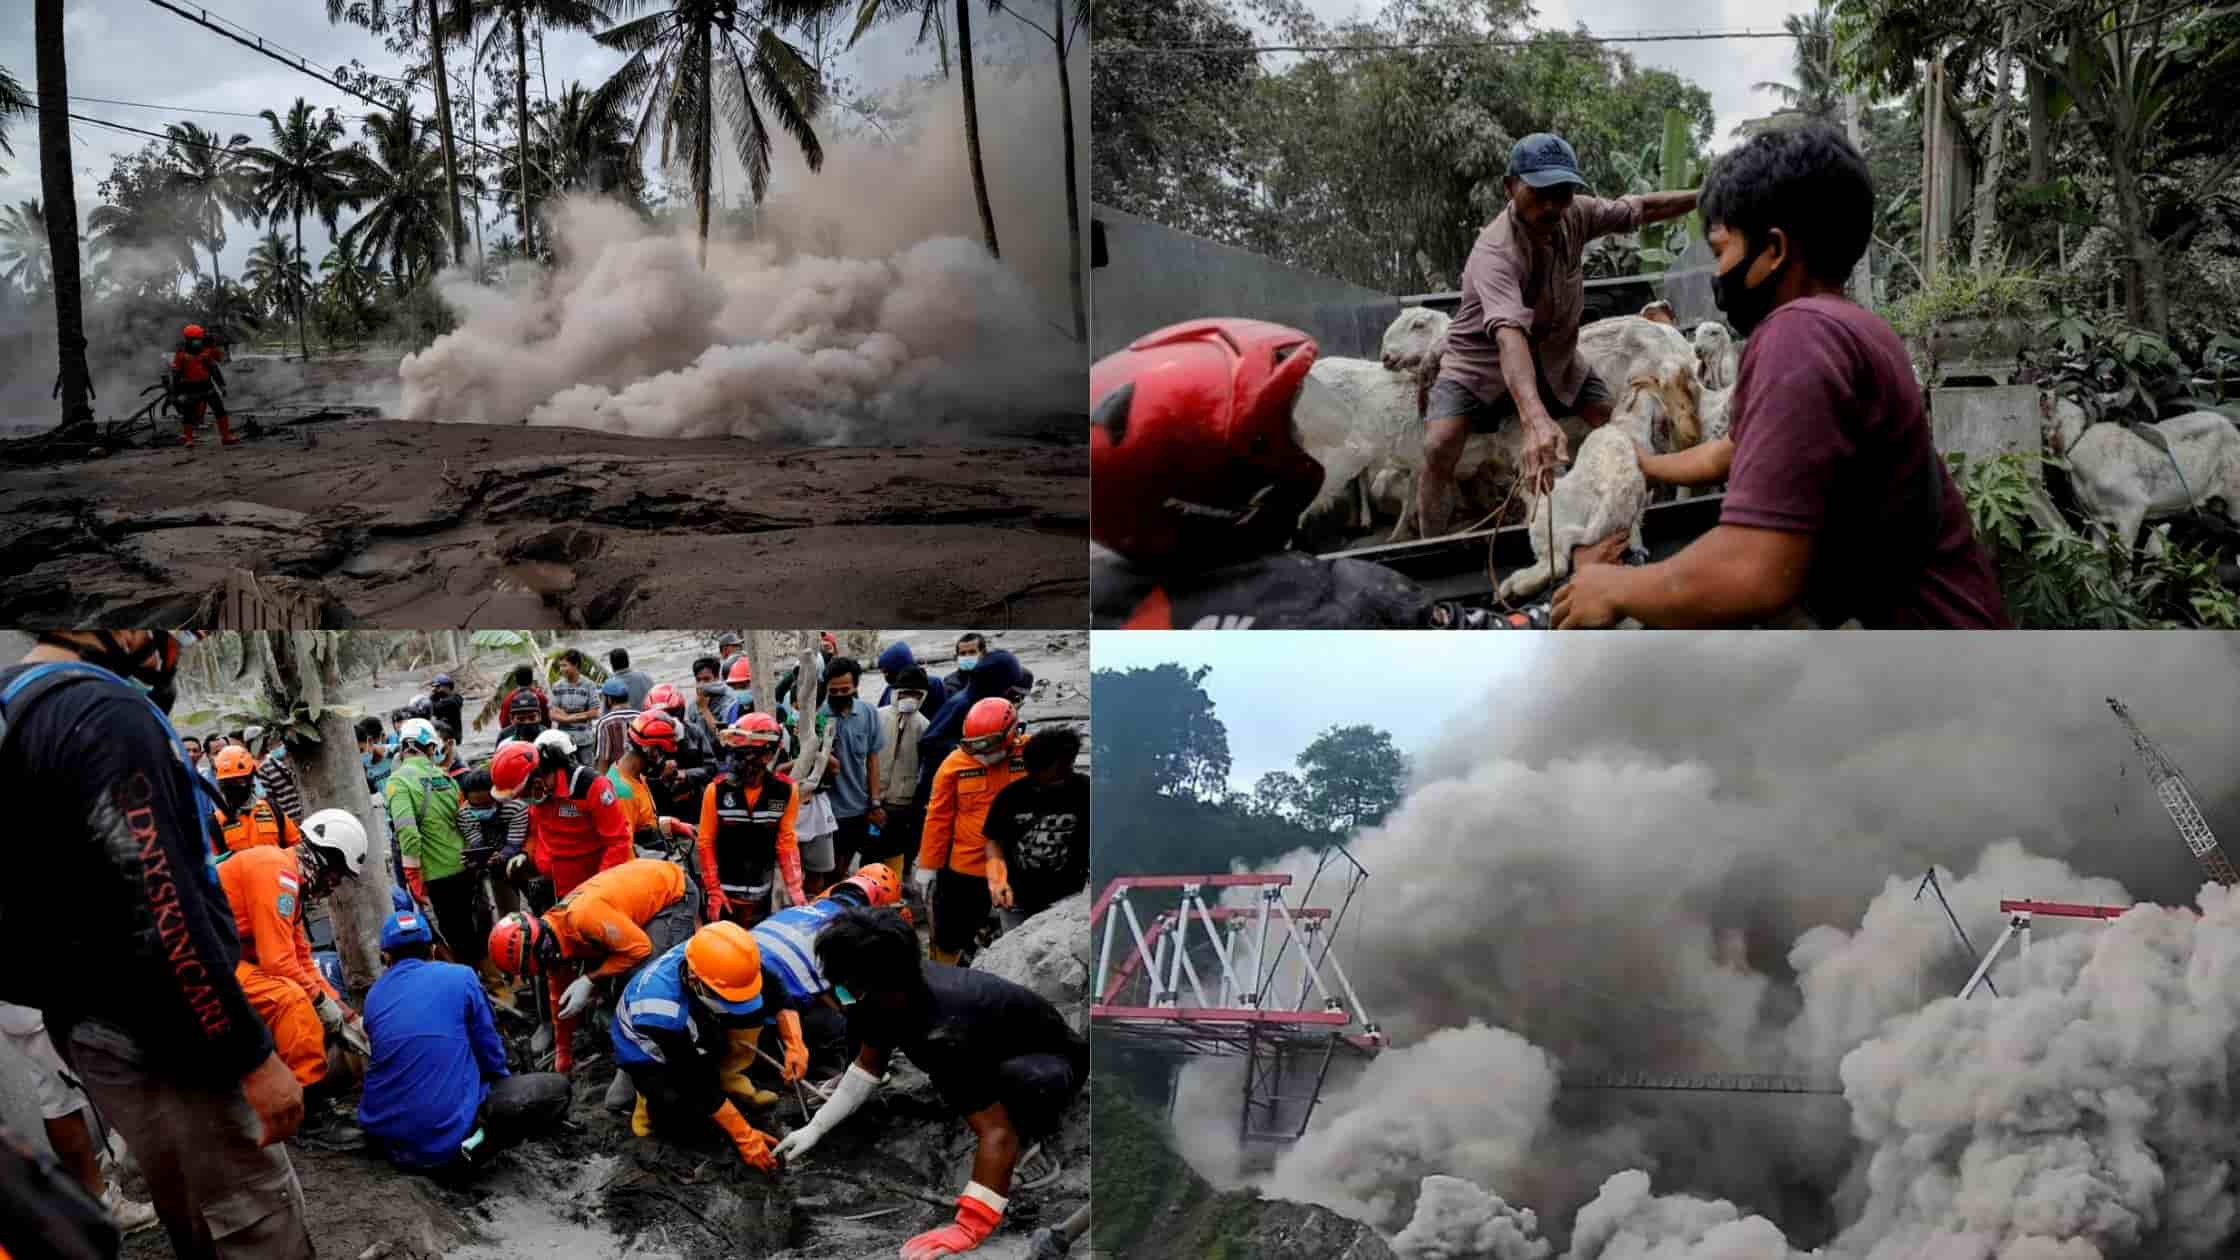 People Struggle In The Aftermath Of The Eruptions